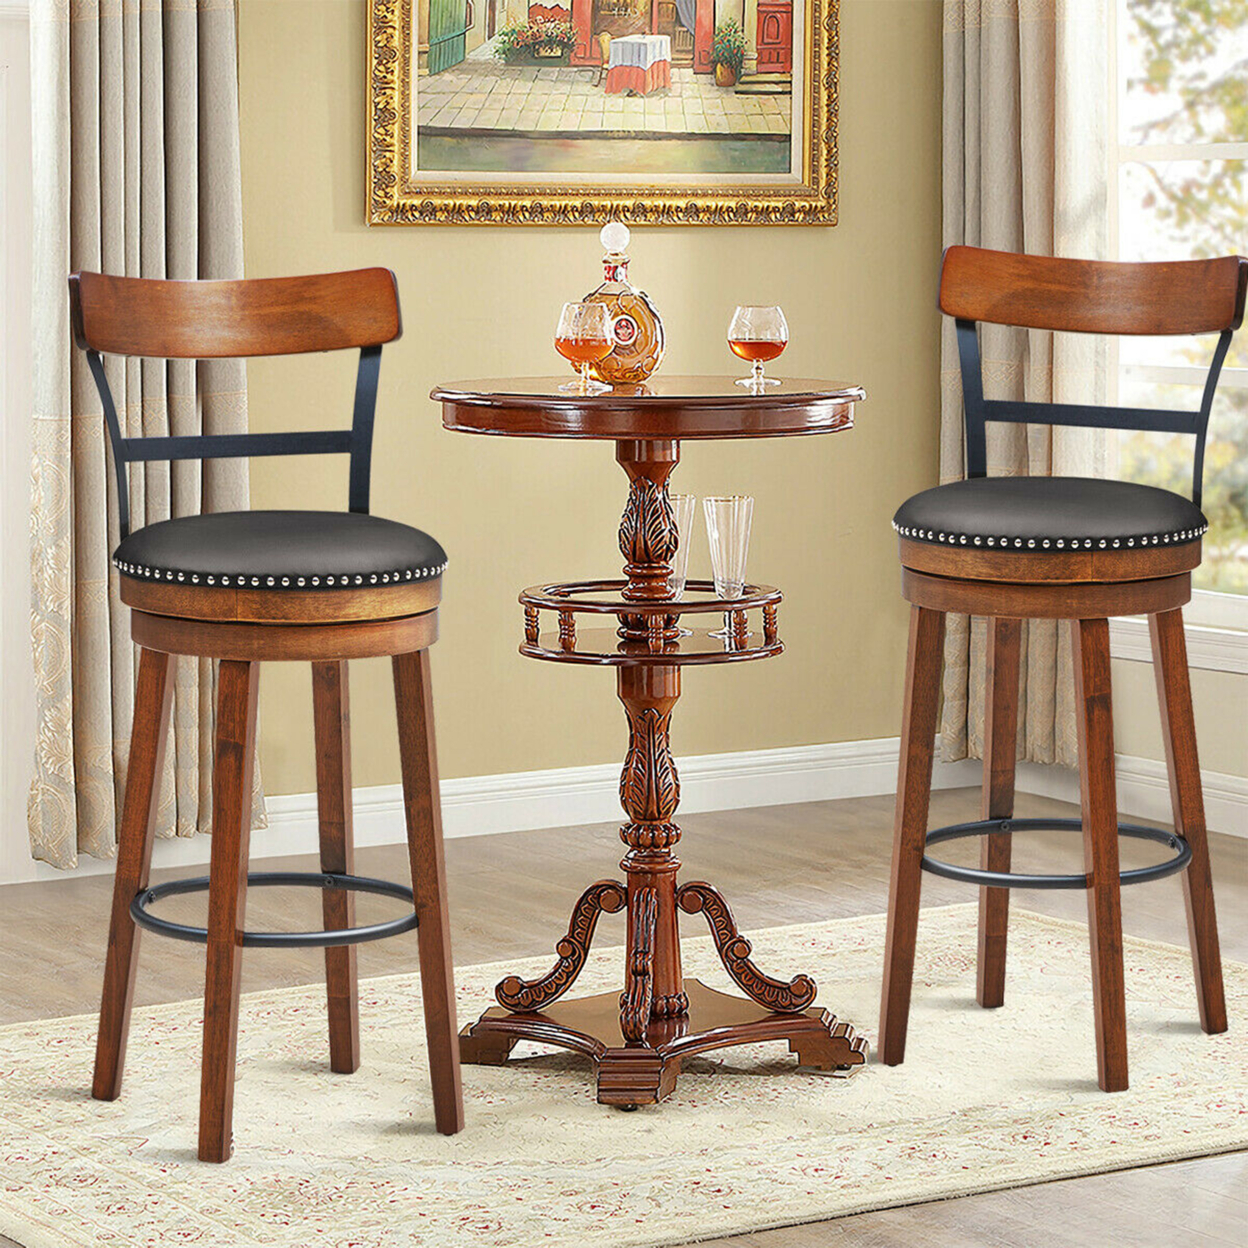 Set Of 2 BarStool 30.5'' Swivel Pub Height Dining Chair With Rubber Wood Legs